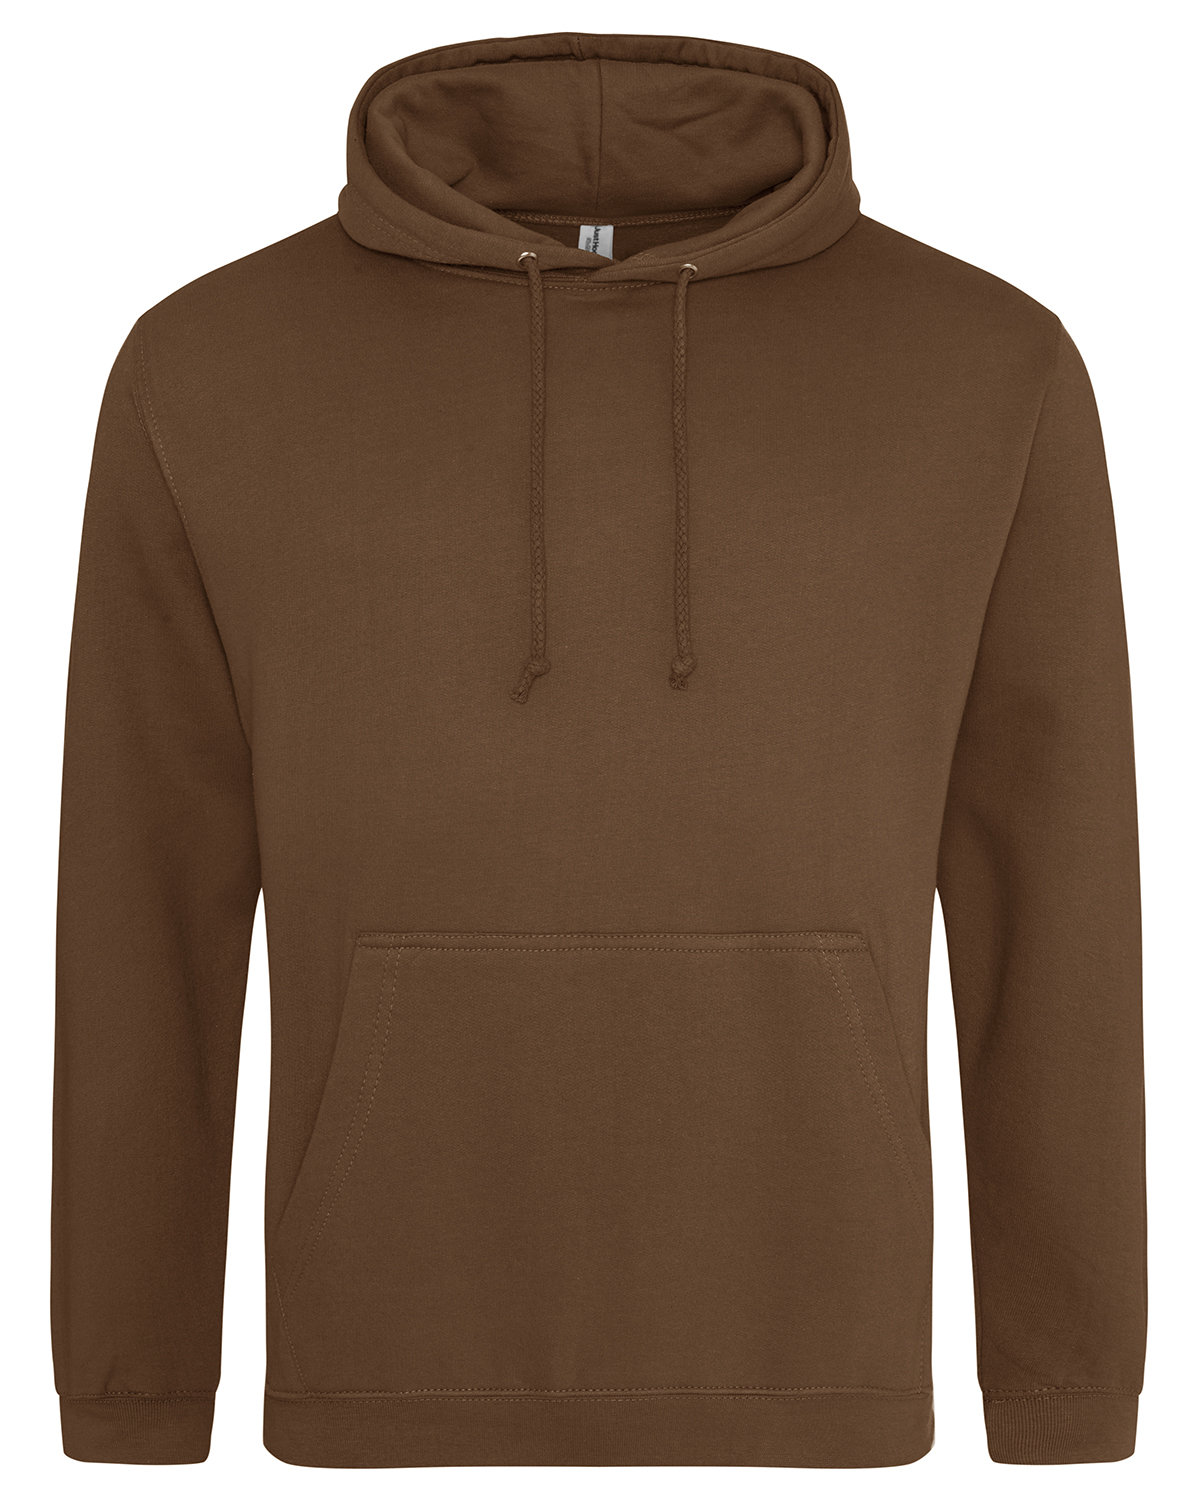 Just Hoods By AWDis Men's 80/20 Midweight College Hooded Sweatshirt CARAMEL TOFFEE 